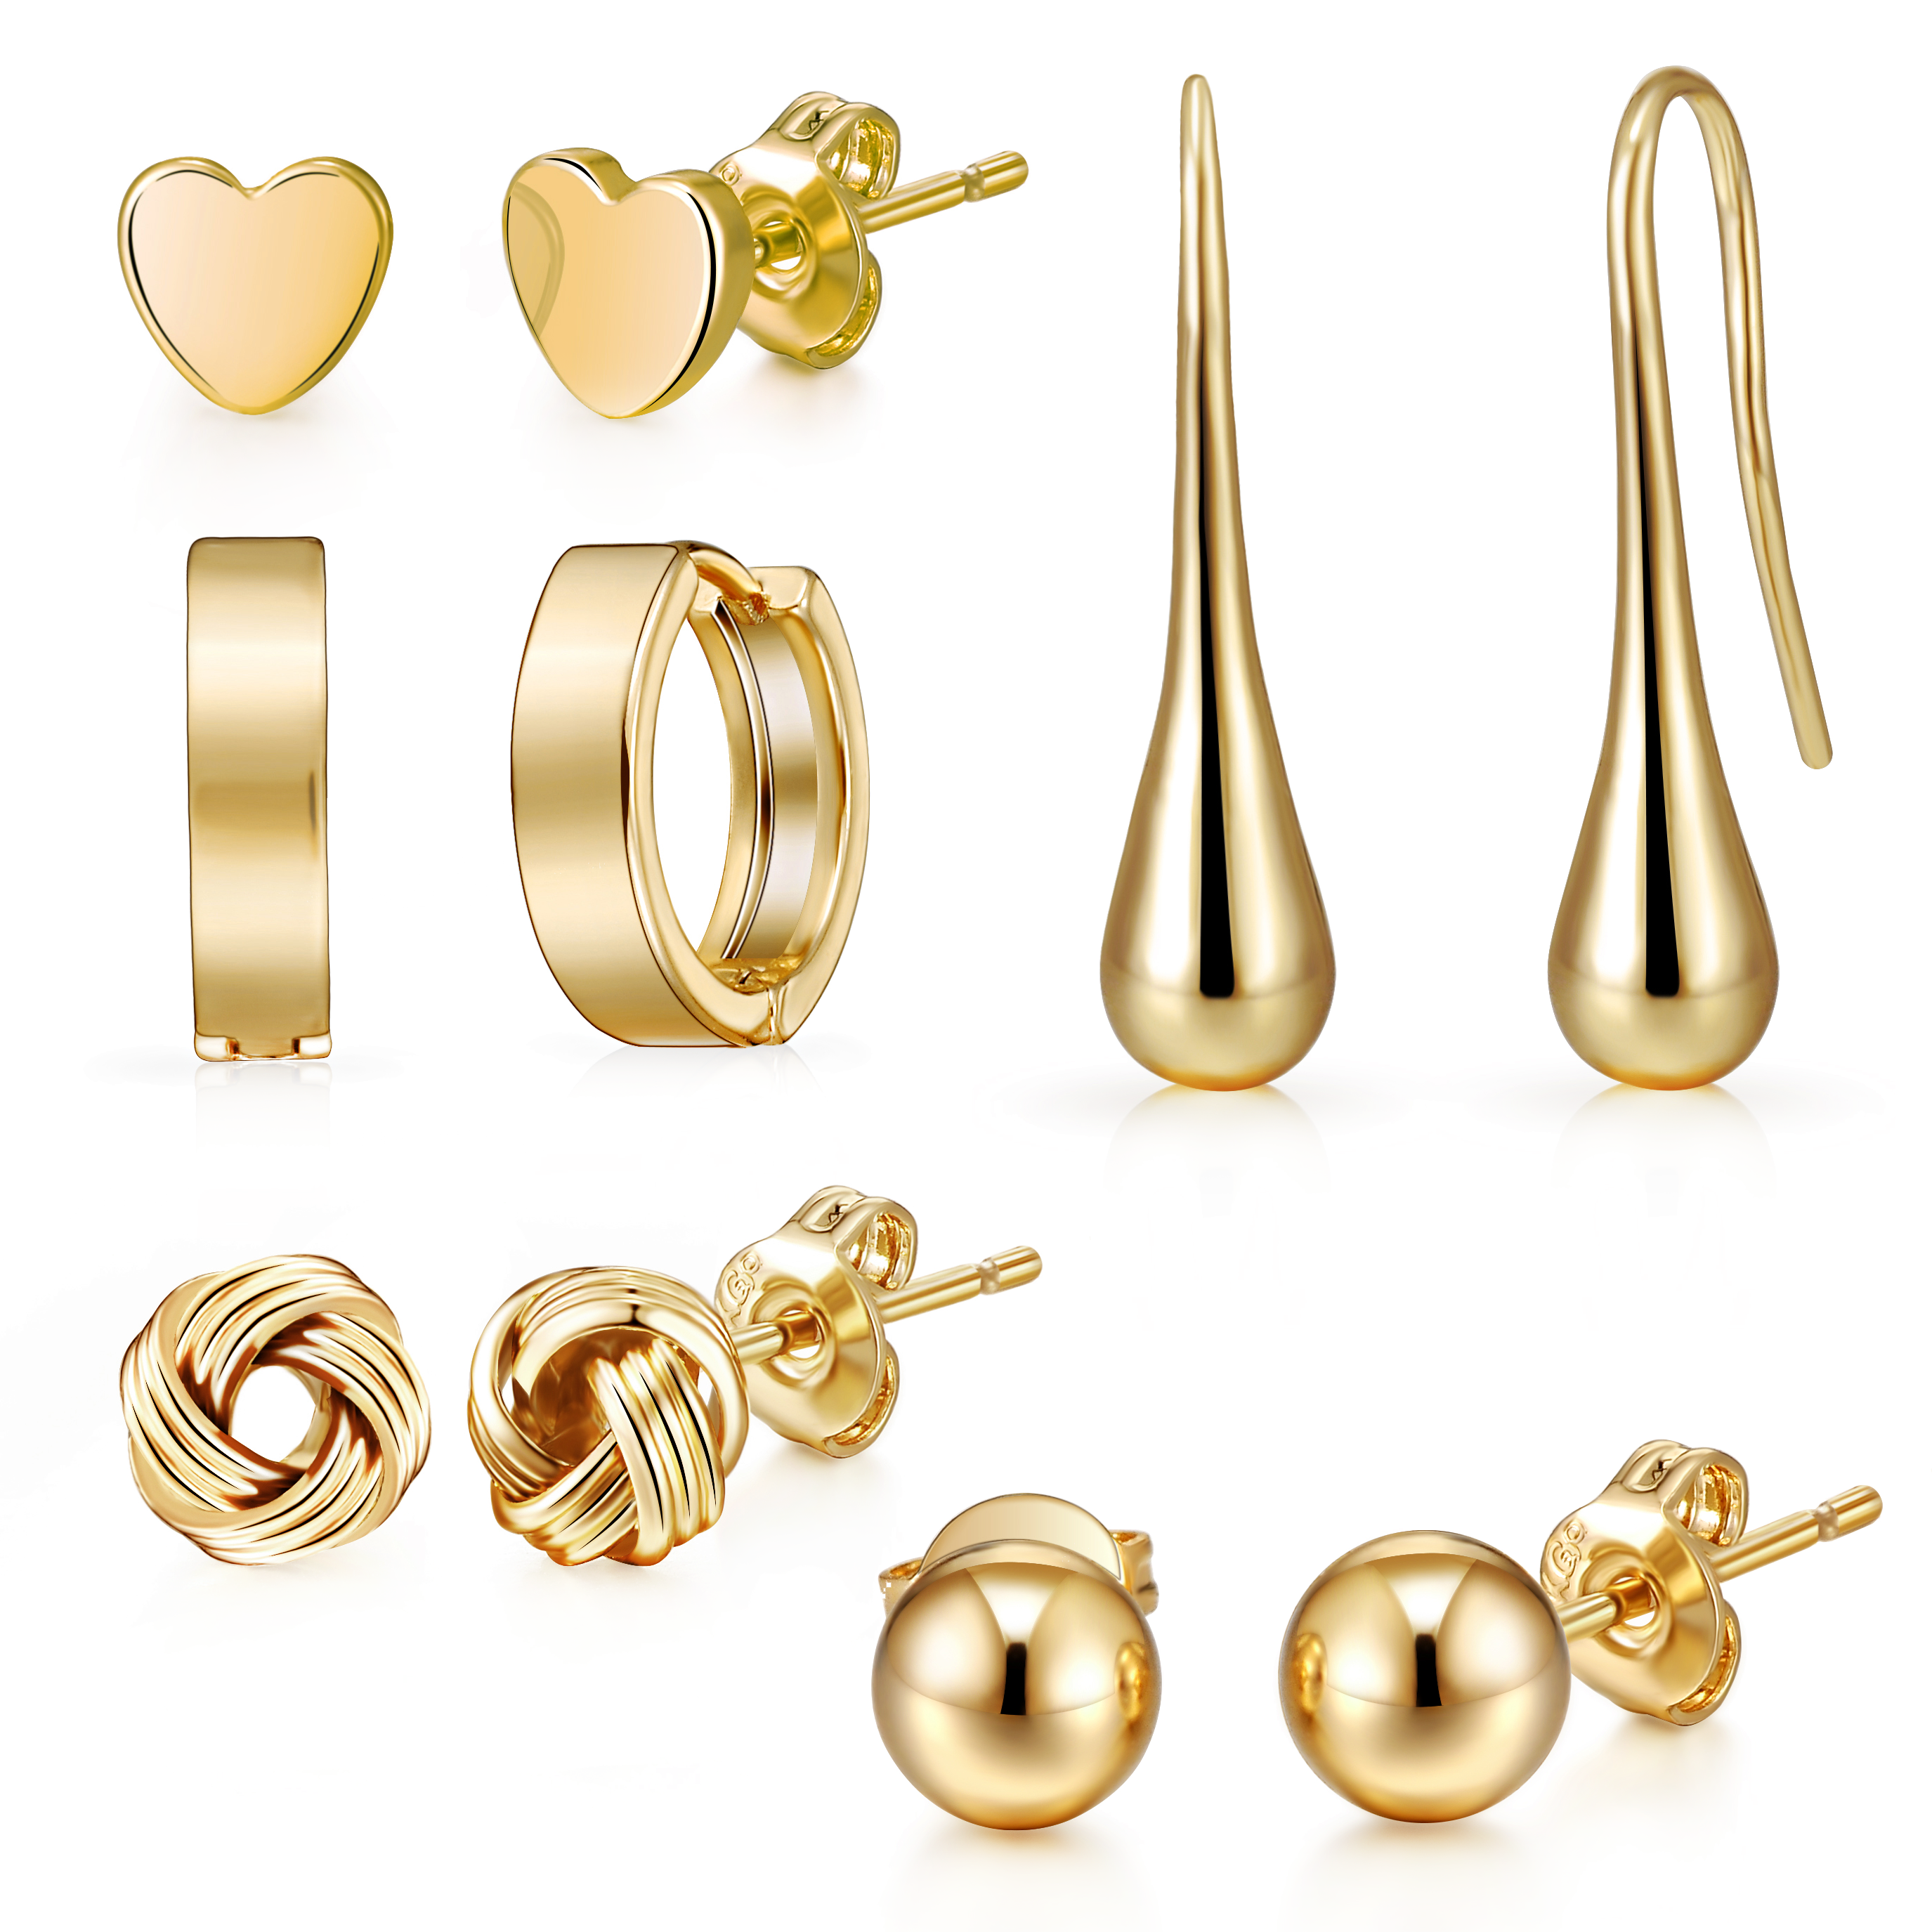 5 Pairs of Gold Plated Earrings